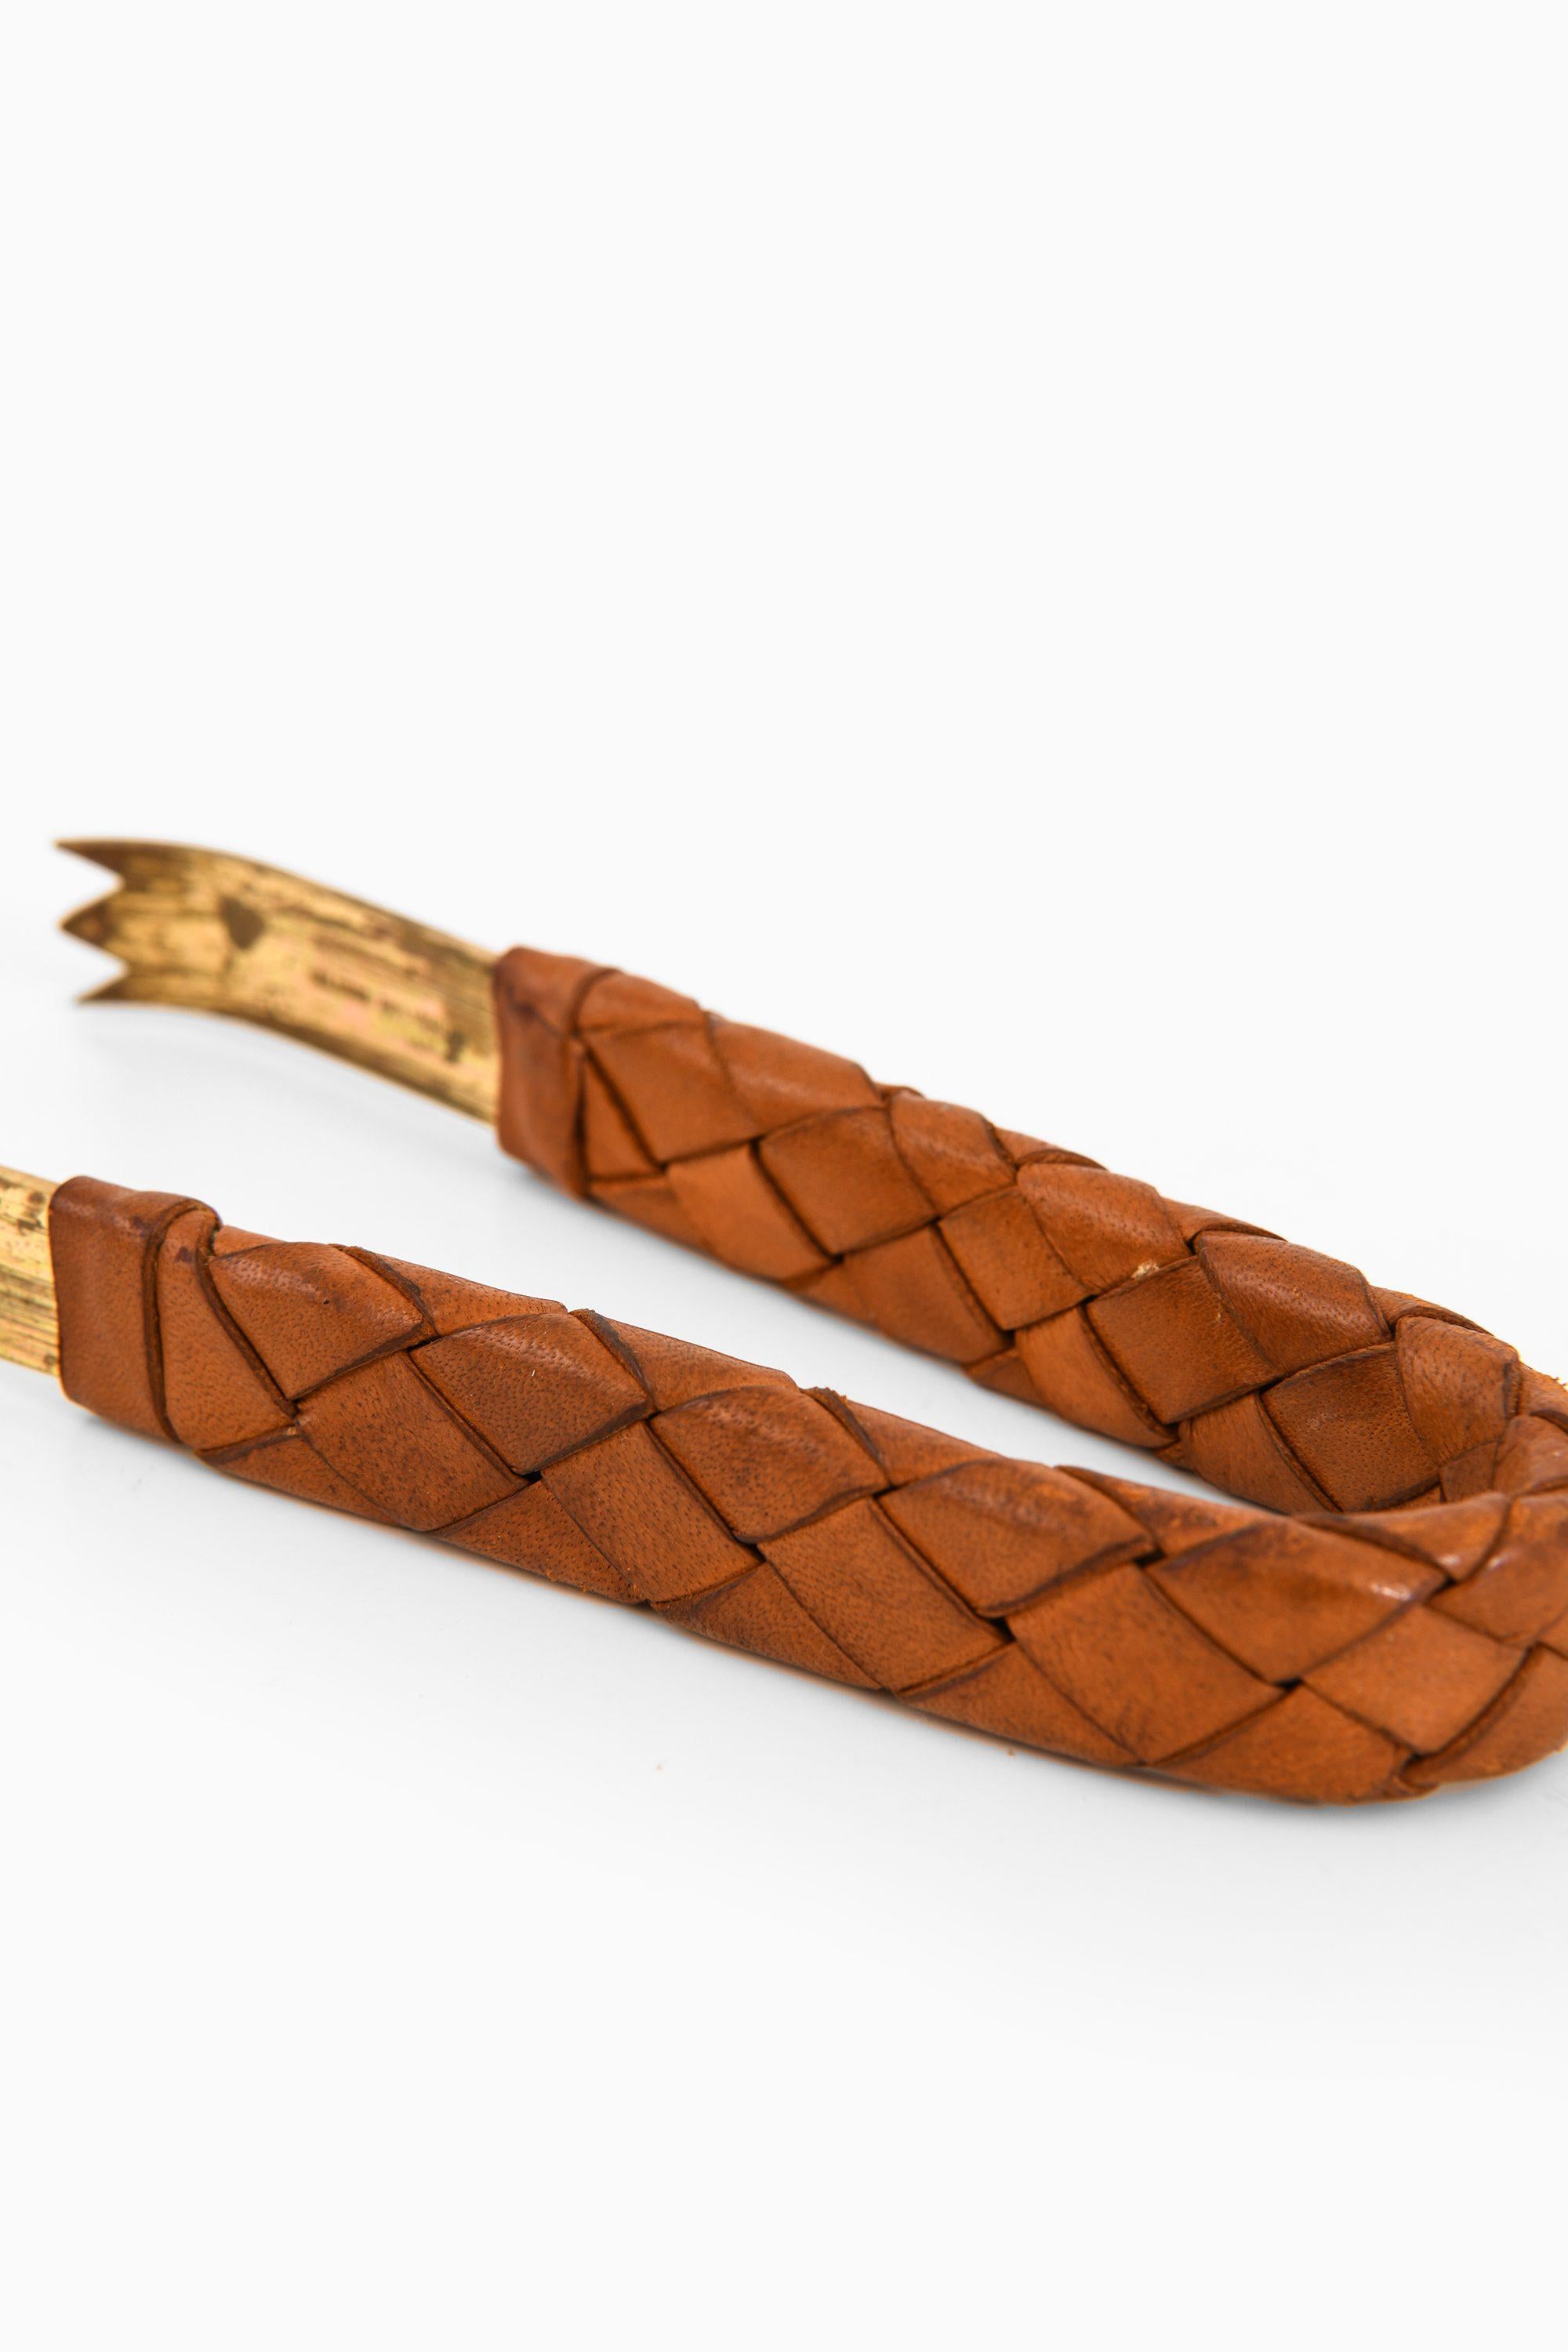 Austrian Pincer in Brass and Braided Leather by Carl Auböck, 1950's For Sale